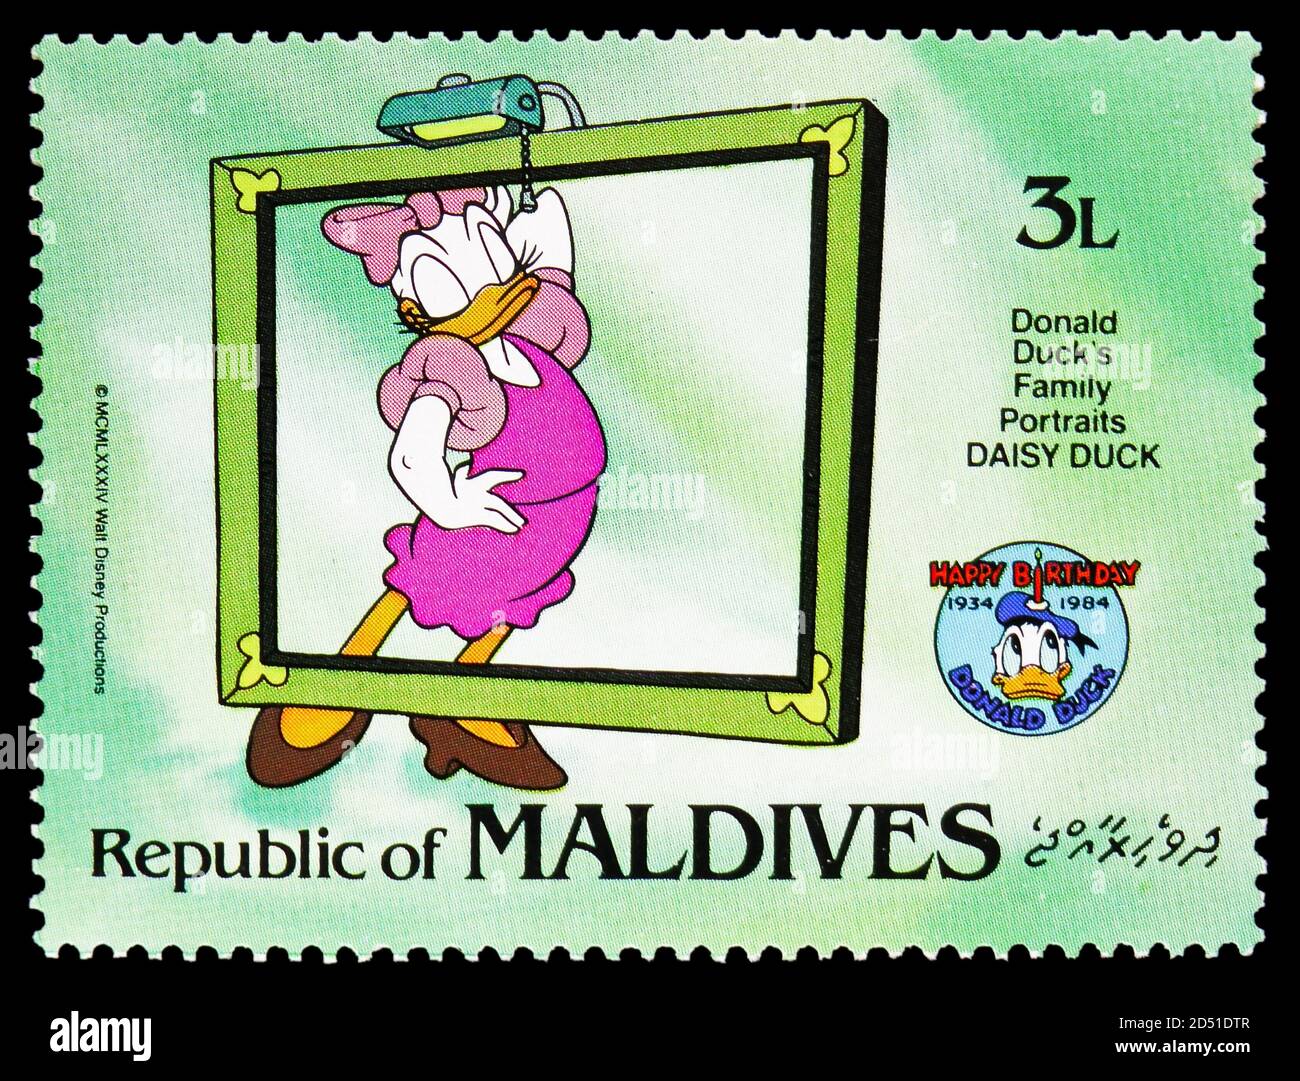 MOSCOW, RUSSIA - SEPTEMBER 28, 2020: Postage stamp printed in Maldives shows Donald Duck´s Family Portraits: Daisy Duck, Disney - The 50th Anniversary Stock Photo